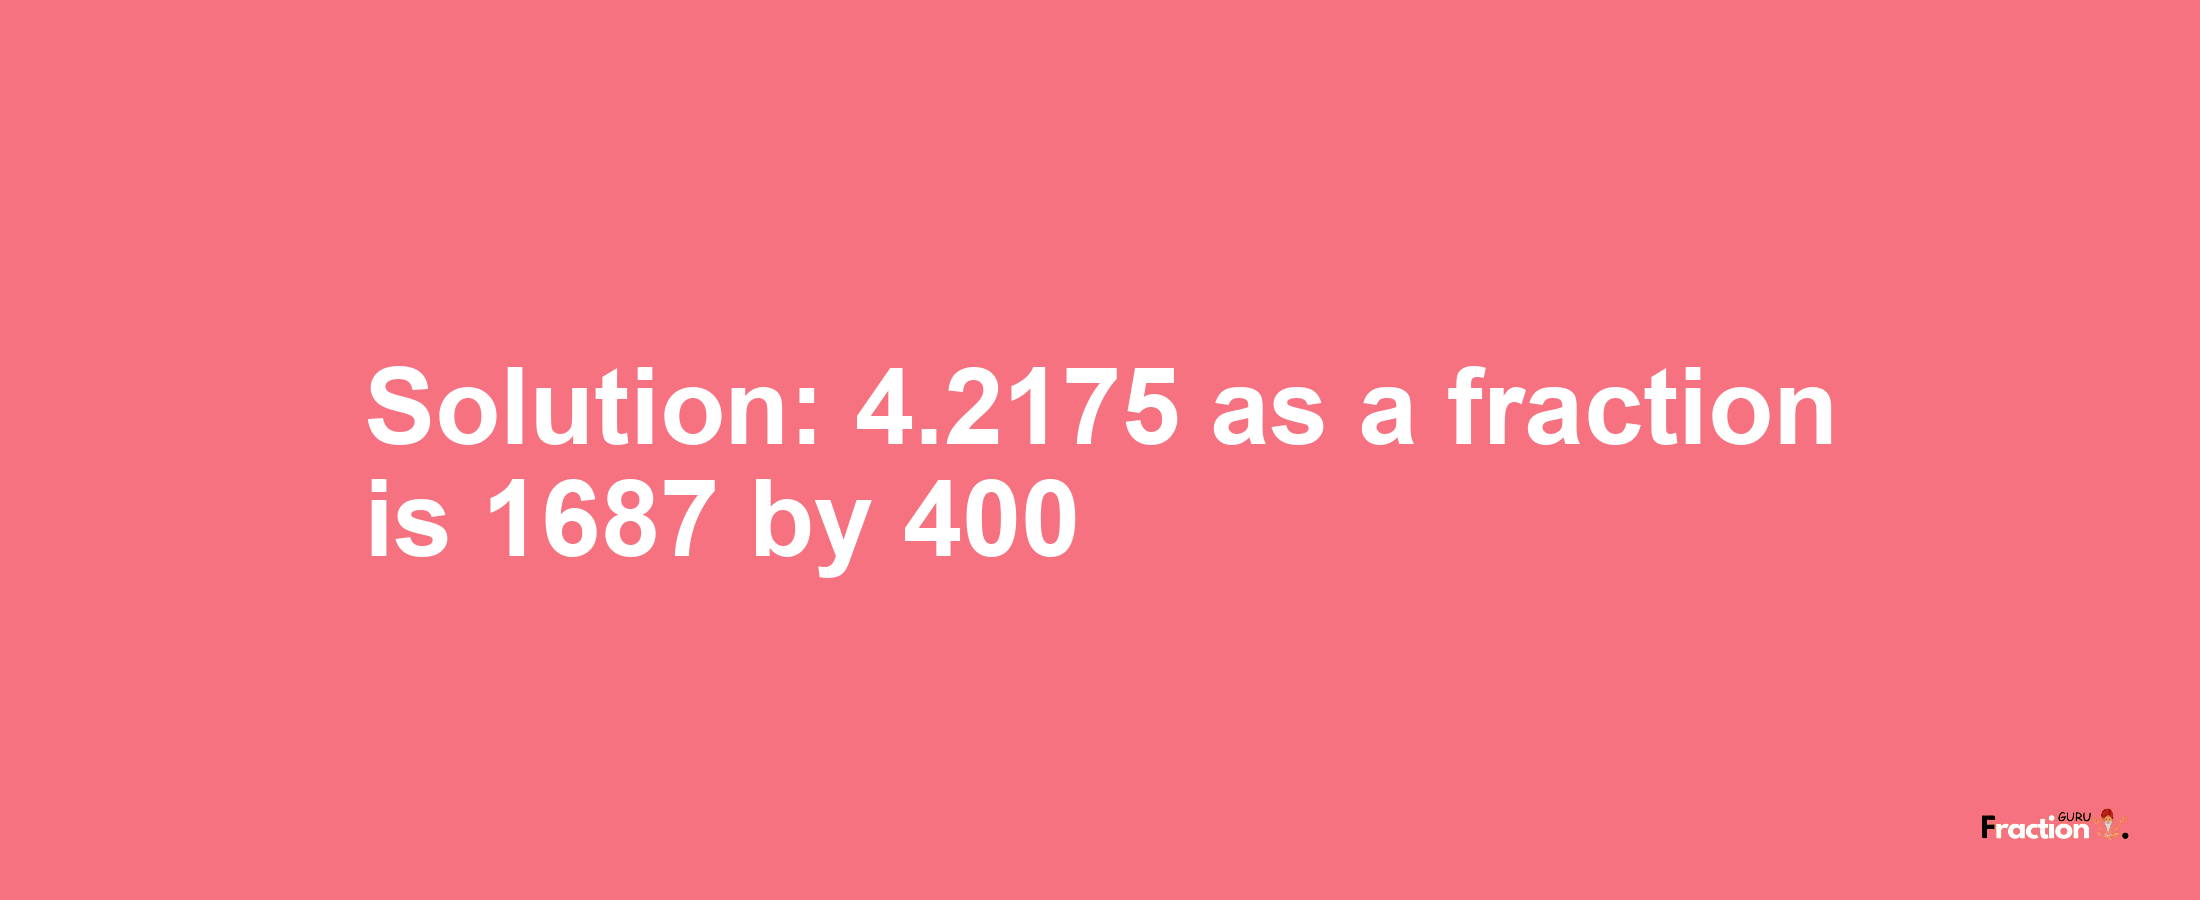 Solution:4.2175 as a fraction is 1687/400